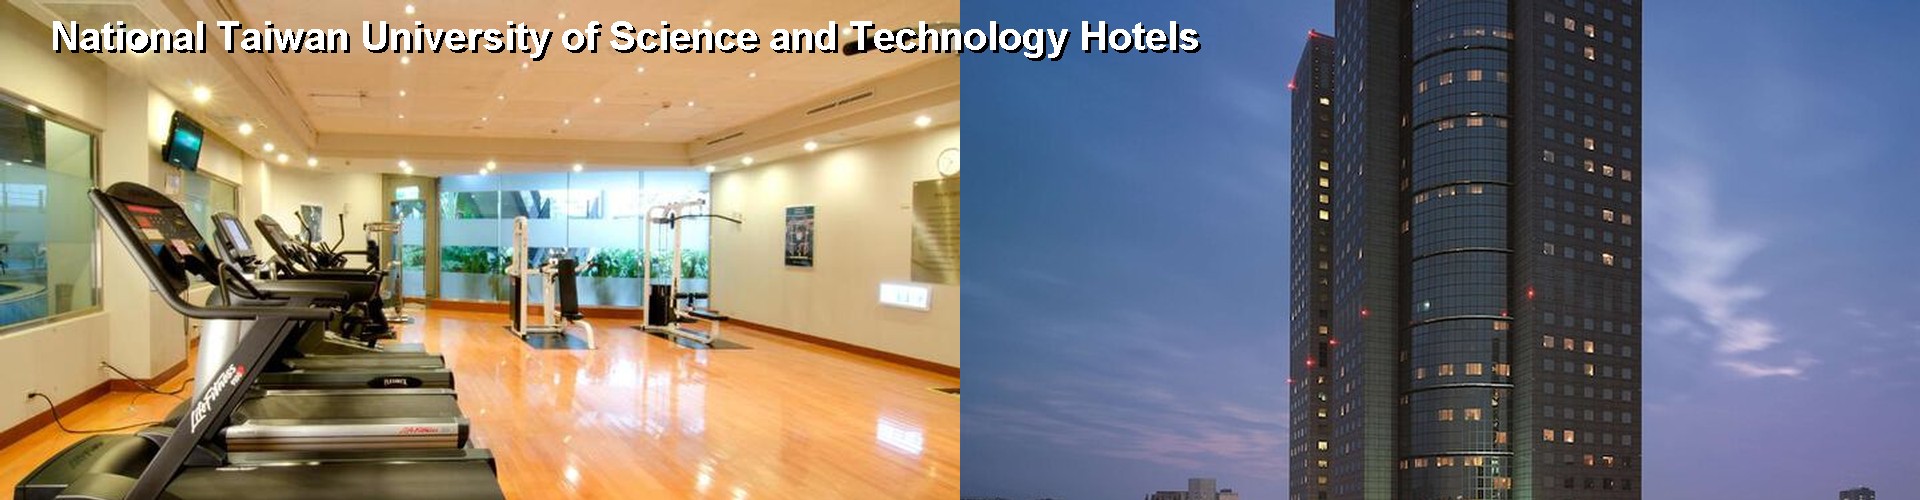 5 Best Hotels near National Taiwan University of Science and Technology